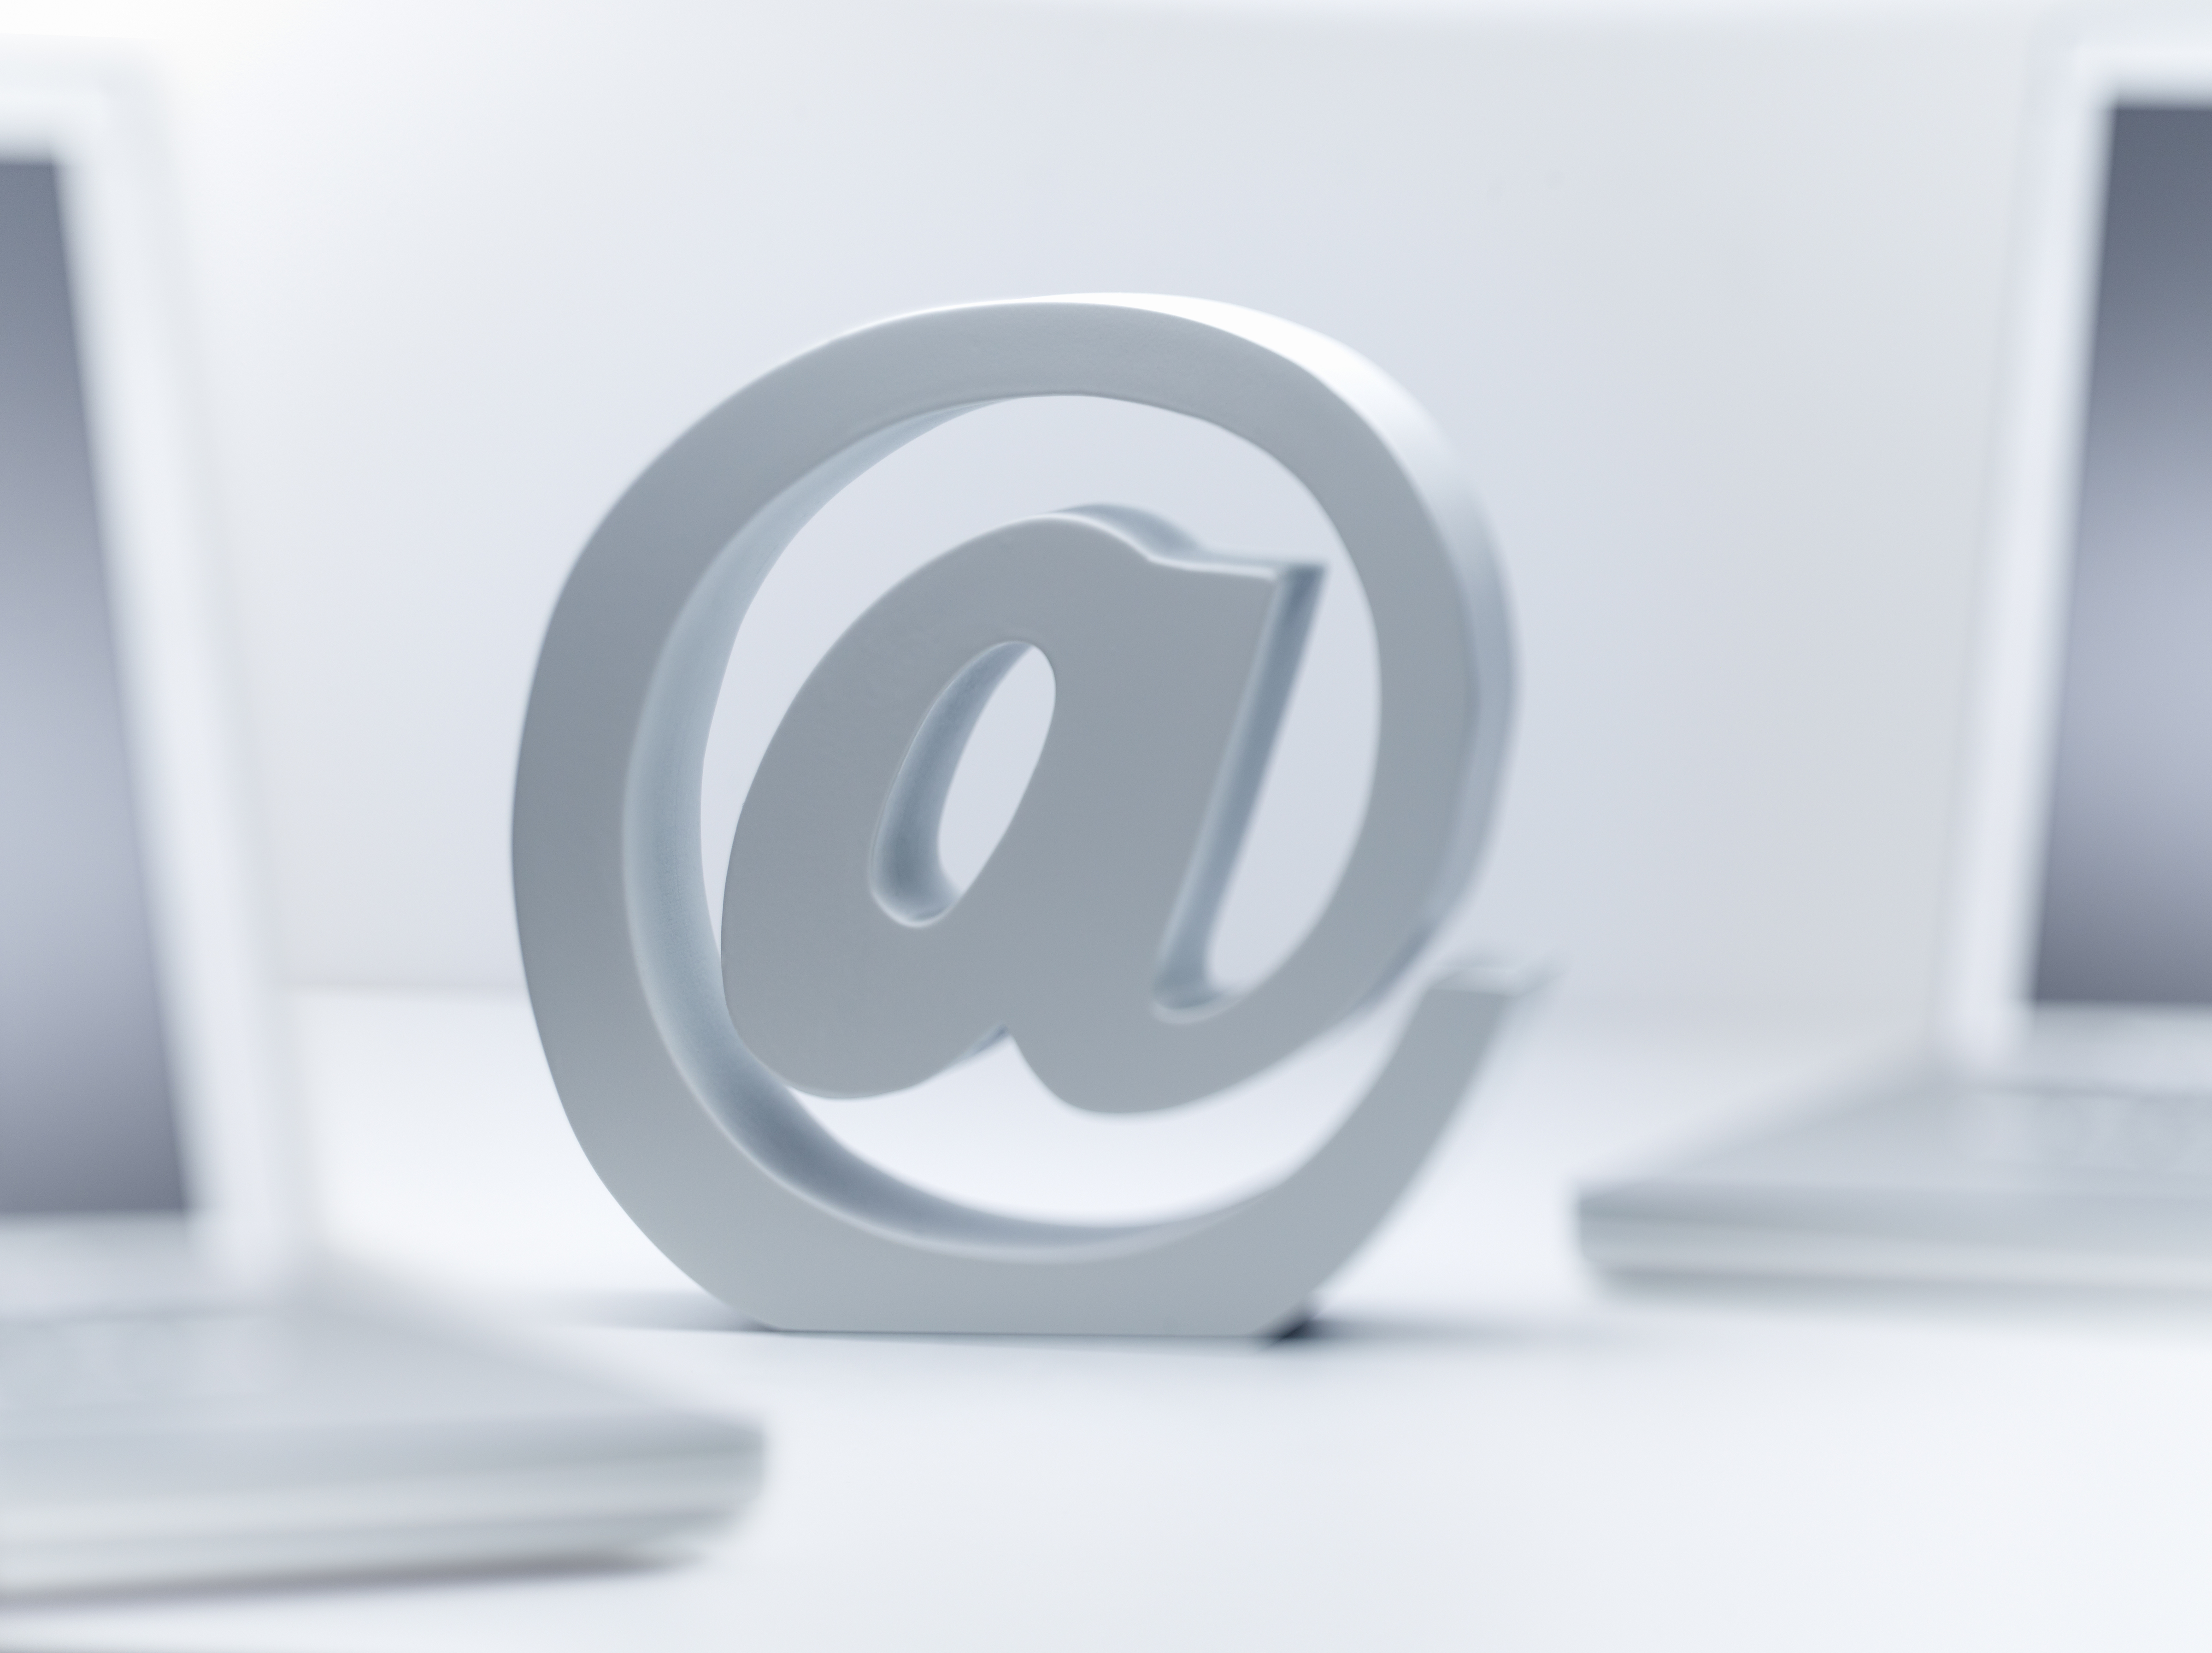 Computers email symbol